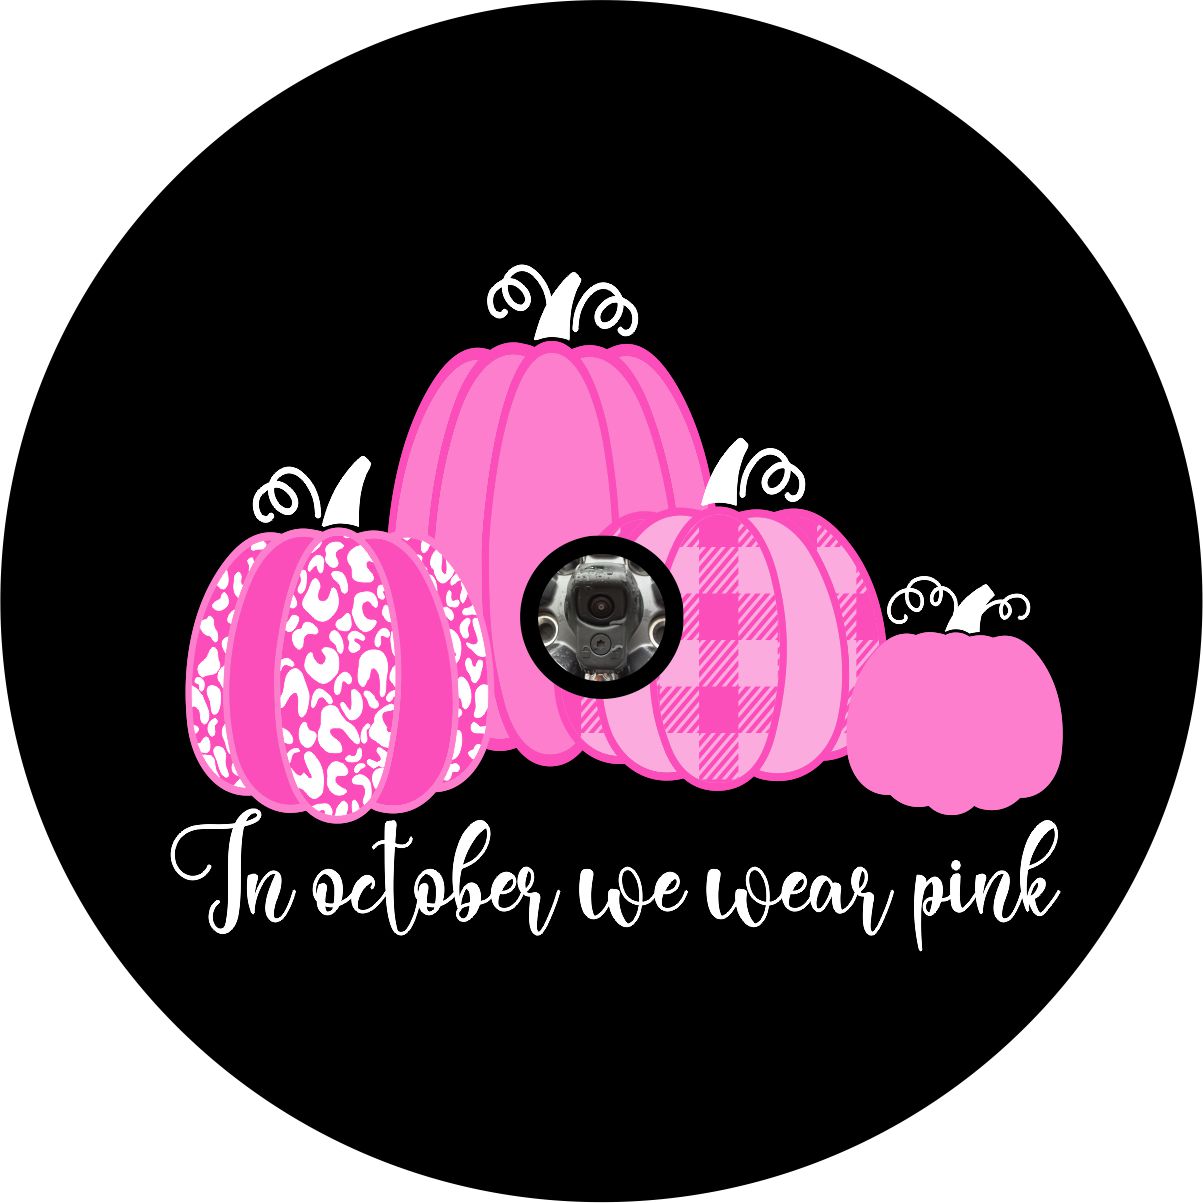 Spare tire cover with camera hole of four pink pumpkins designed with the saying in October we wear pink spare tire cover on black vinyl for Jeep, RV, Camper, Bronco and more